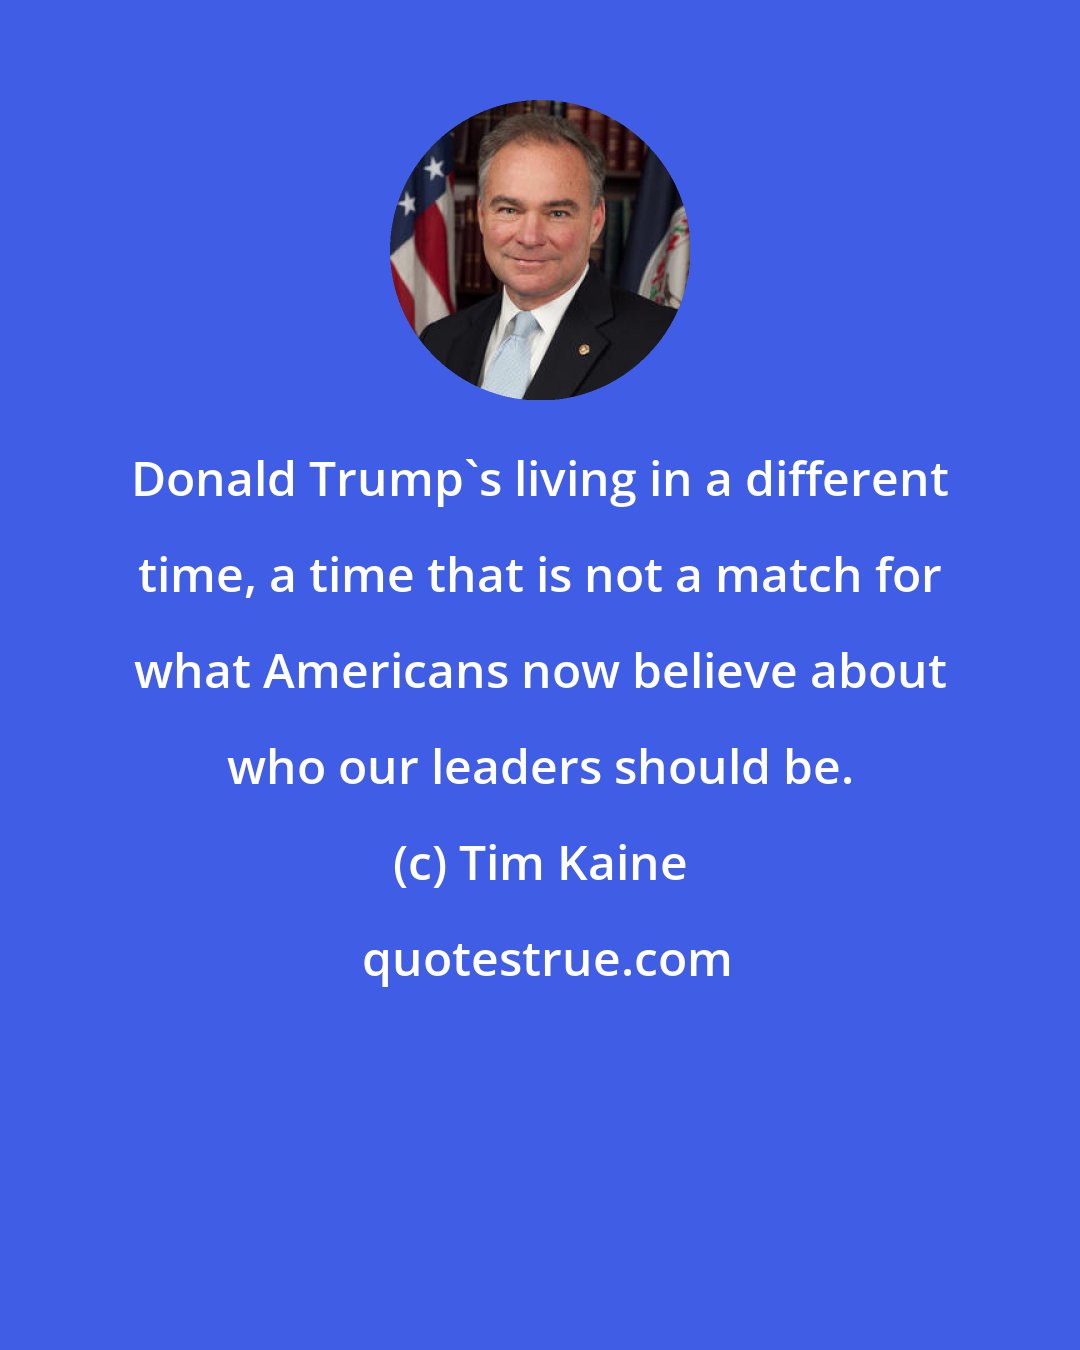 Tim Kaine: Donald Trump's living in a different time, a time that is not a match for what Americans now believe about who our leaders should be.